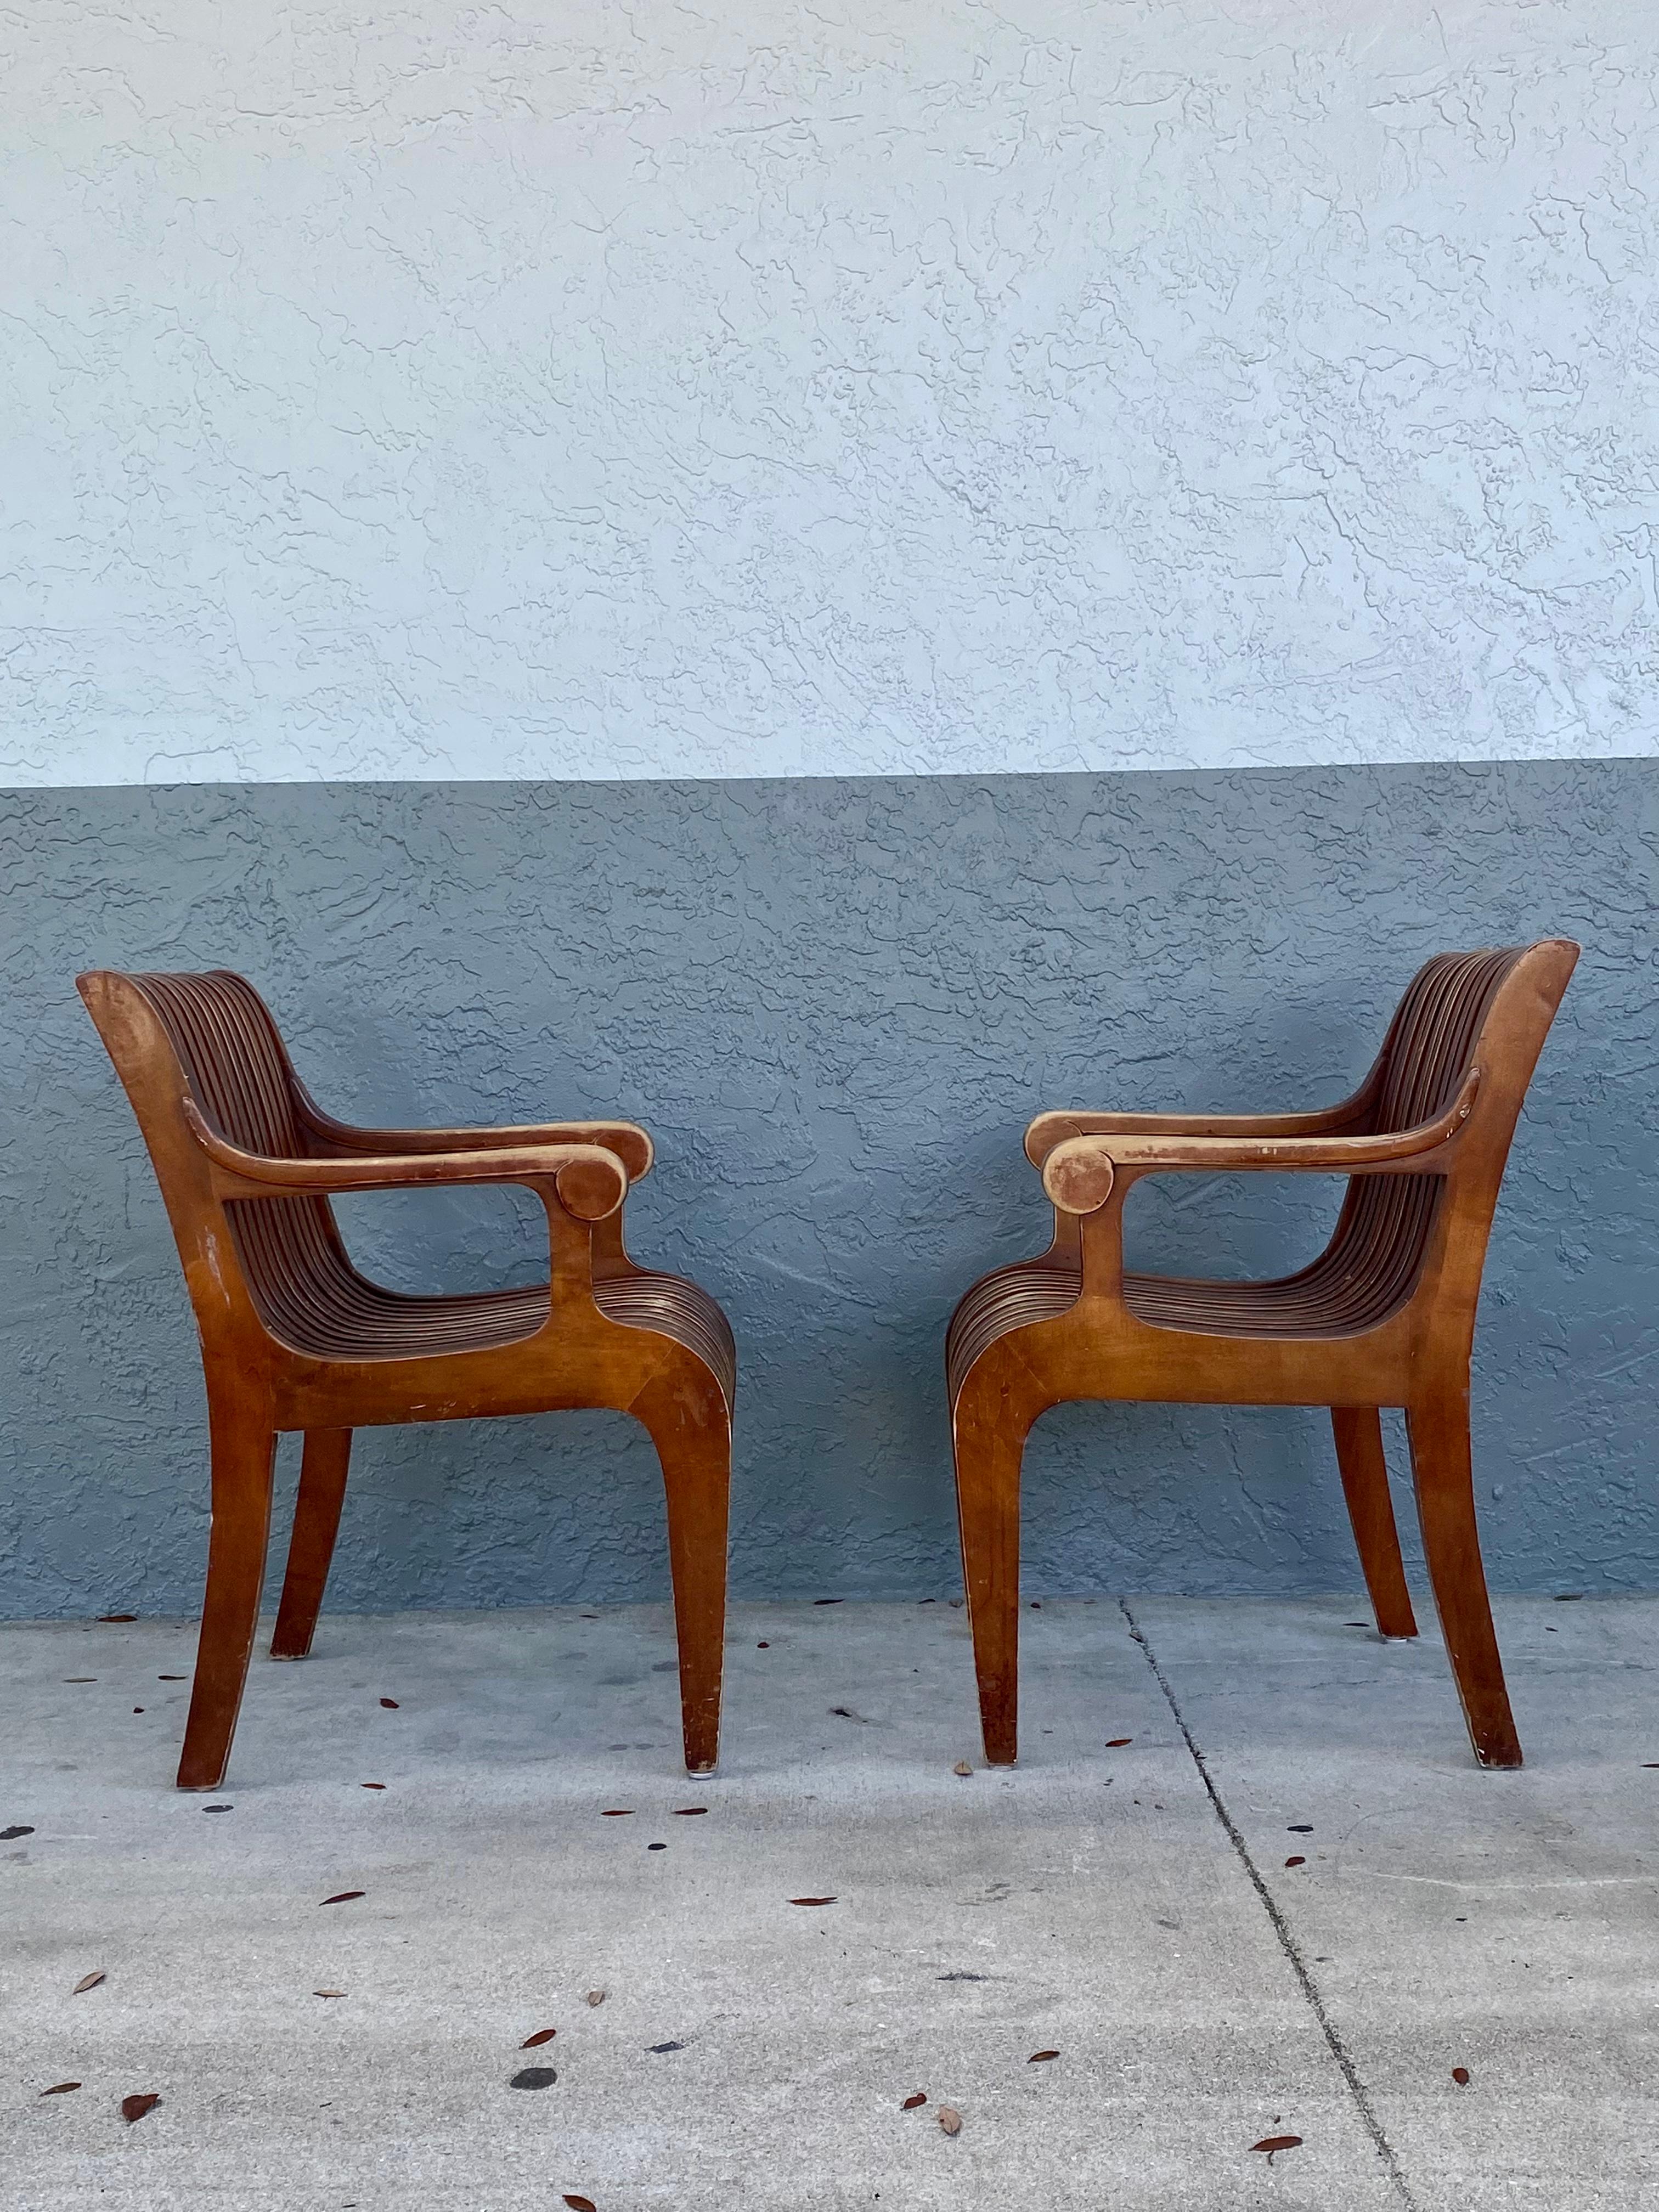 1950s Sculptural Teak Curved Slatted Bentwood Scroll Armchairs, Set of 2 In Good Condition For Sale In Fort Lauderdale, FL